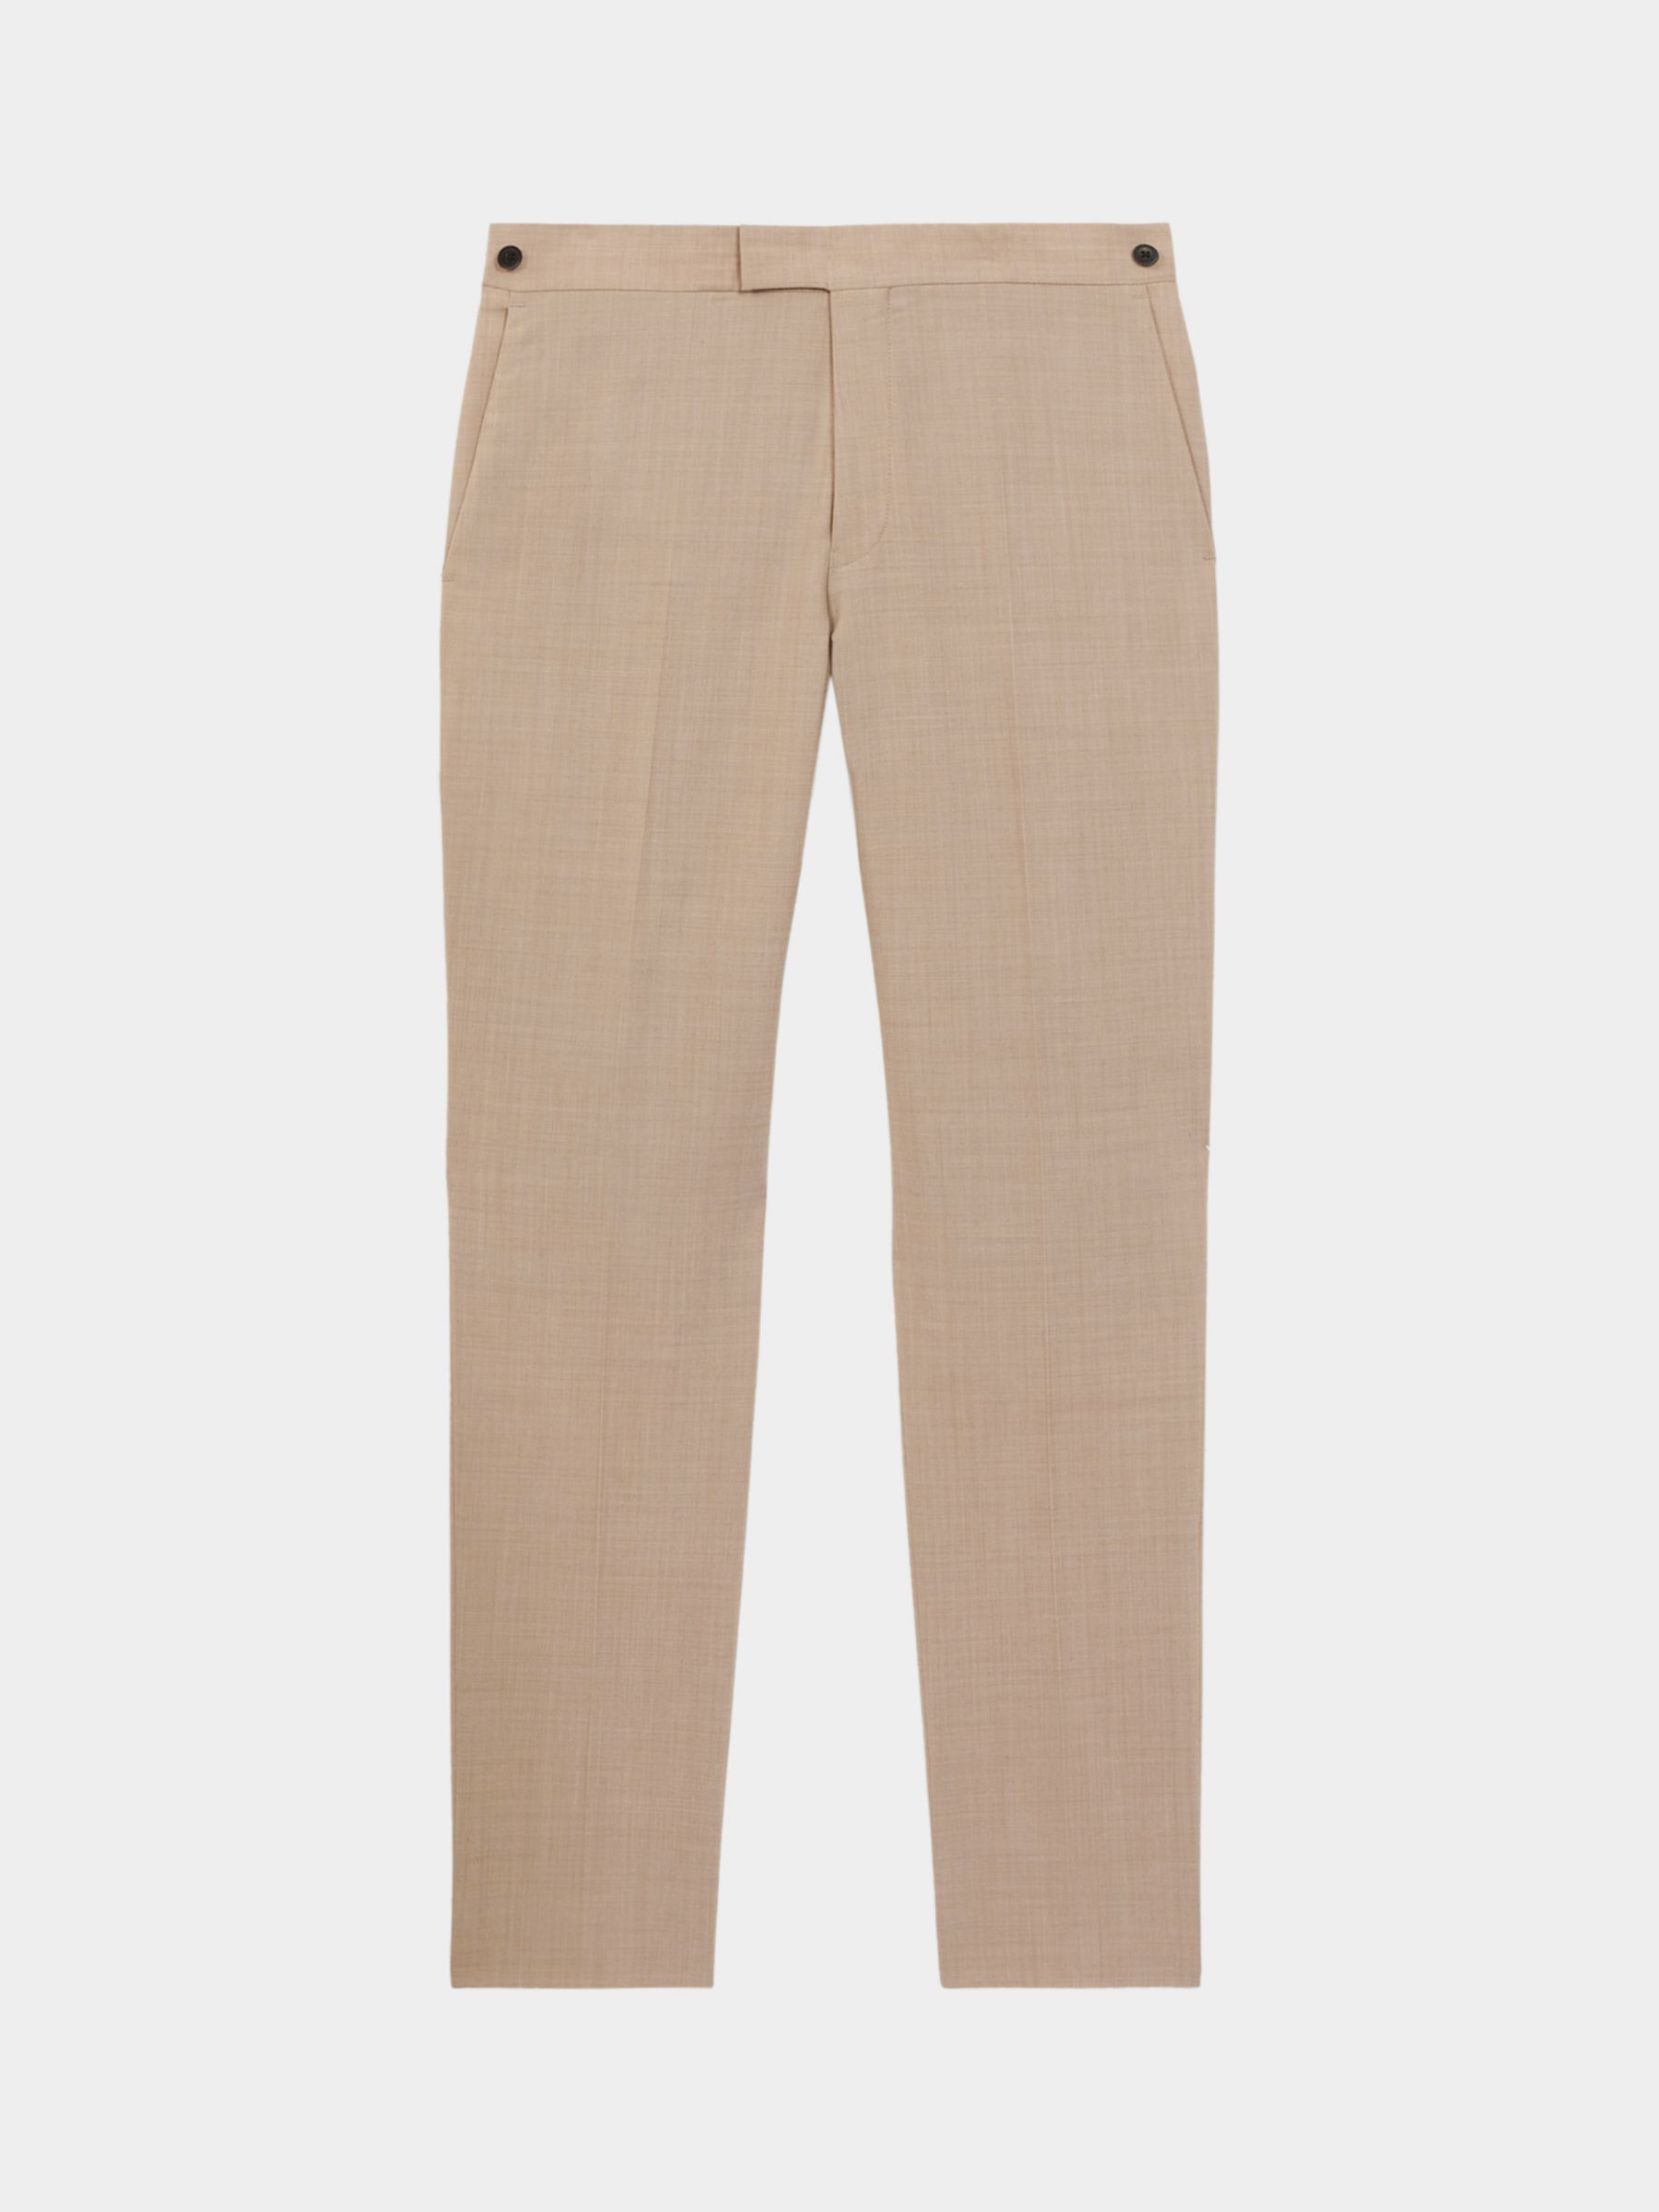 Buy Reiss Wish Wool Mix Trousers Online at johnlewis.com